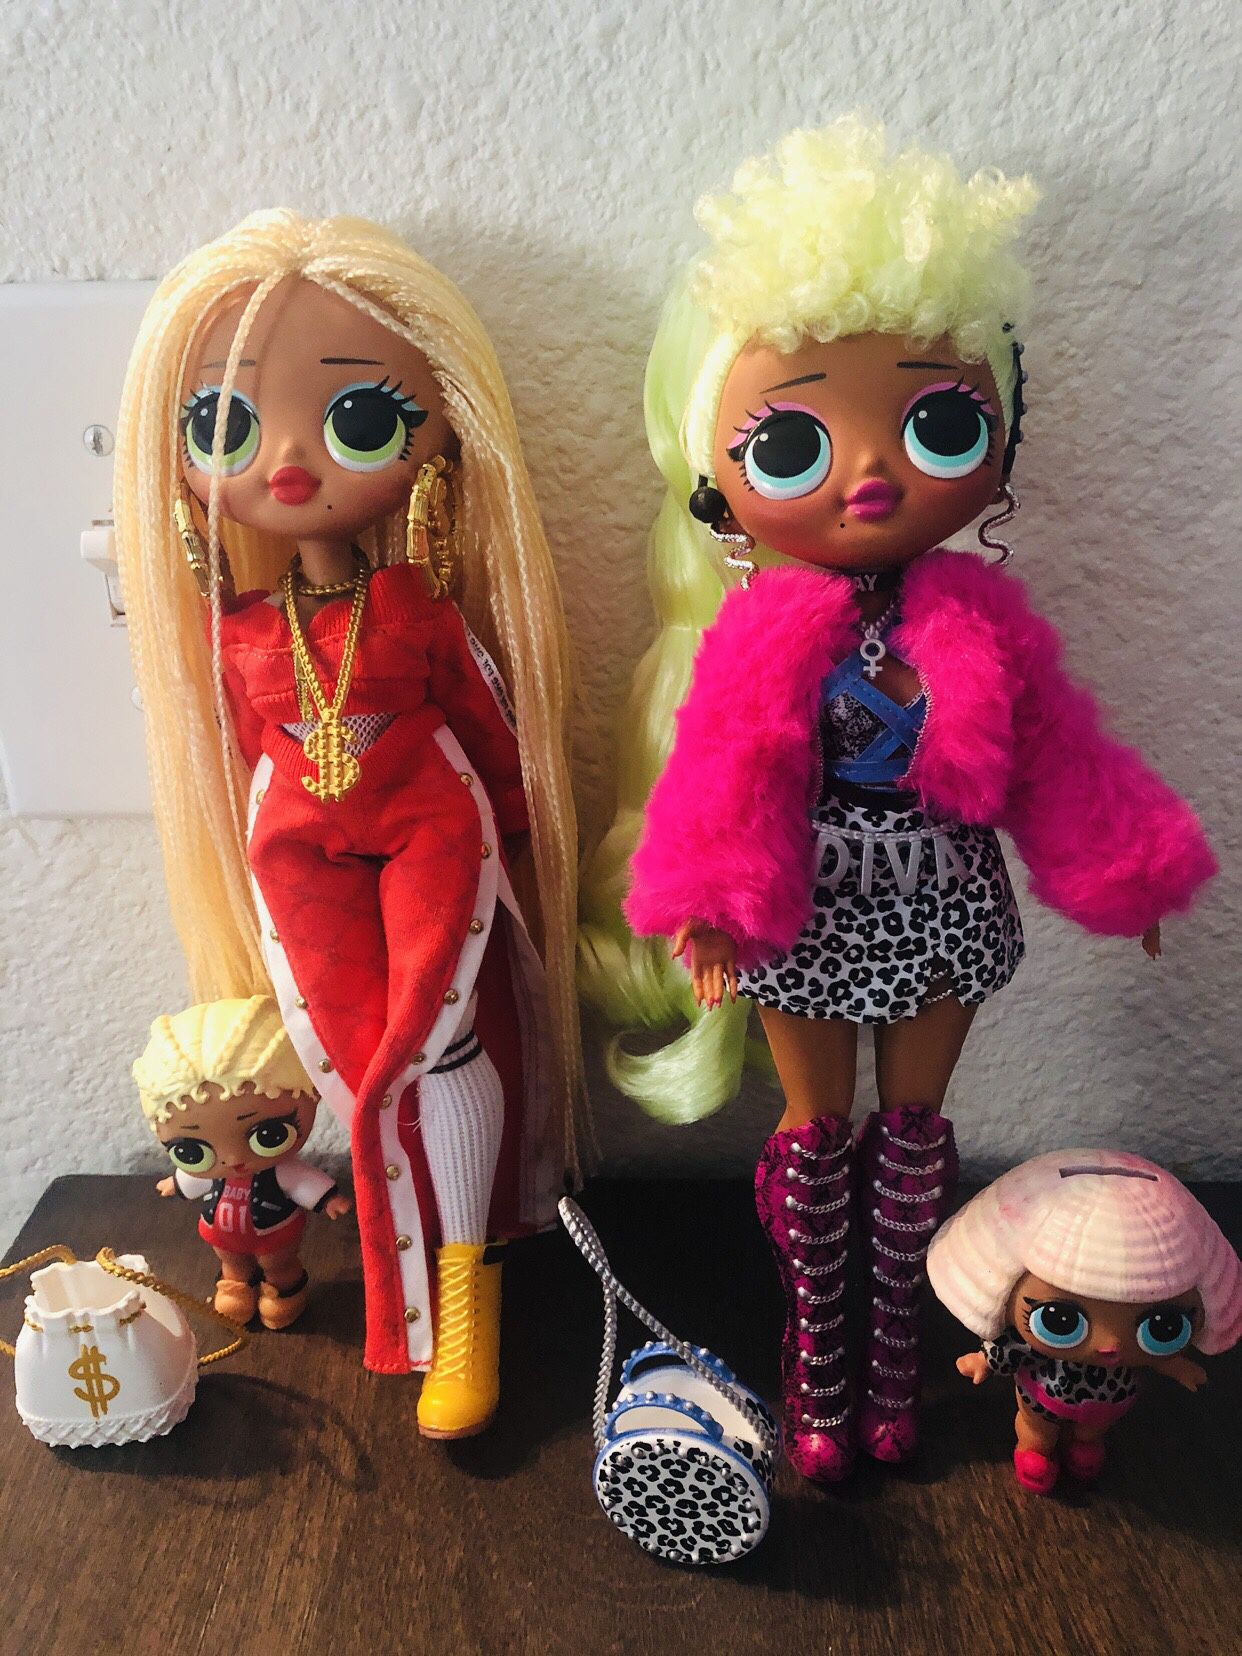 NEW LOL OMG SURPRISE DOLLS for Sale in Stockton, CA - OfferUp